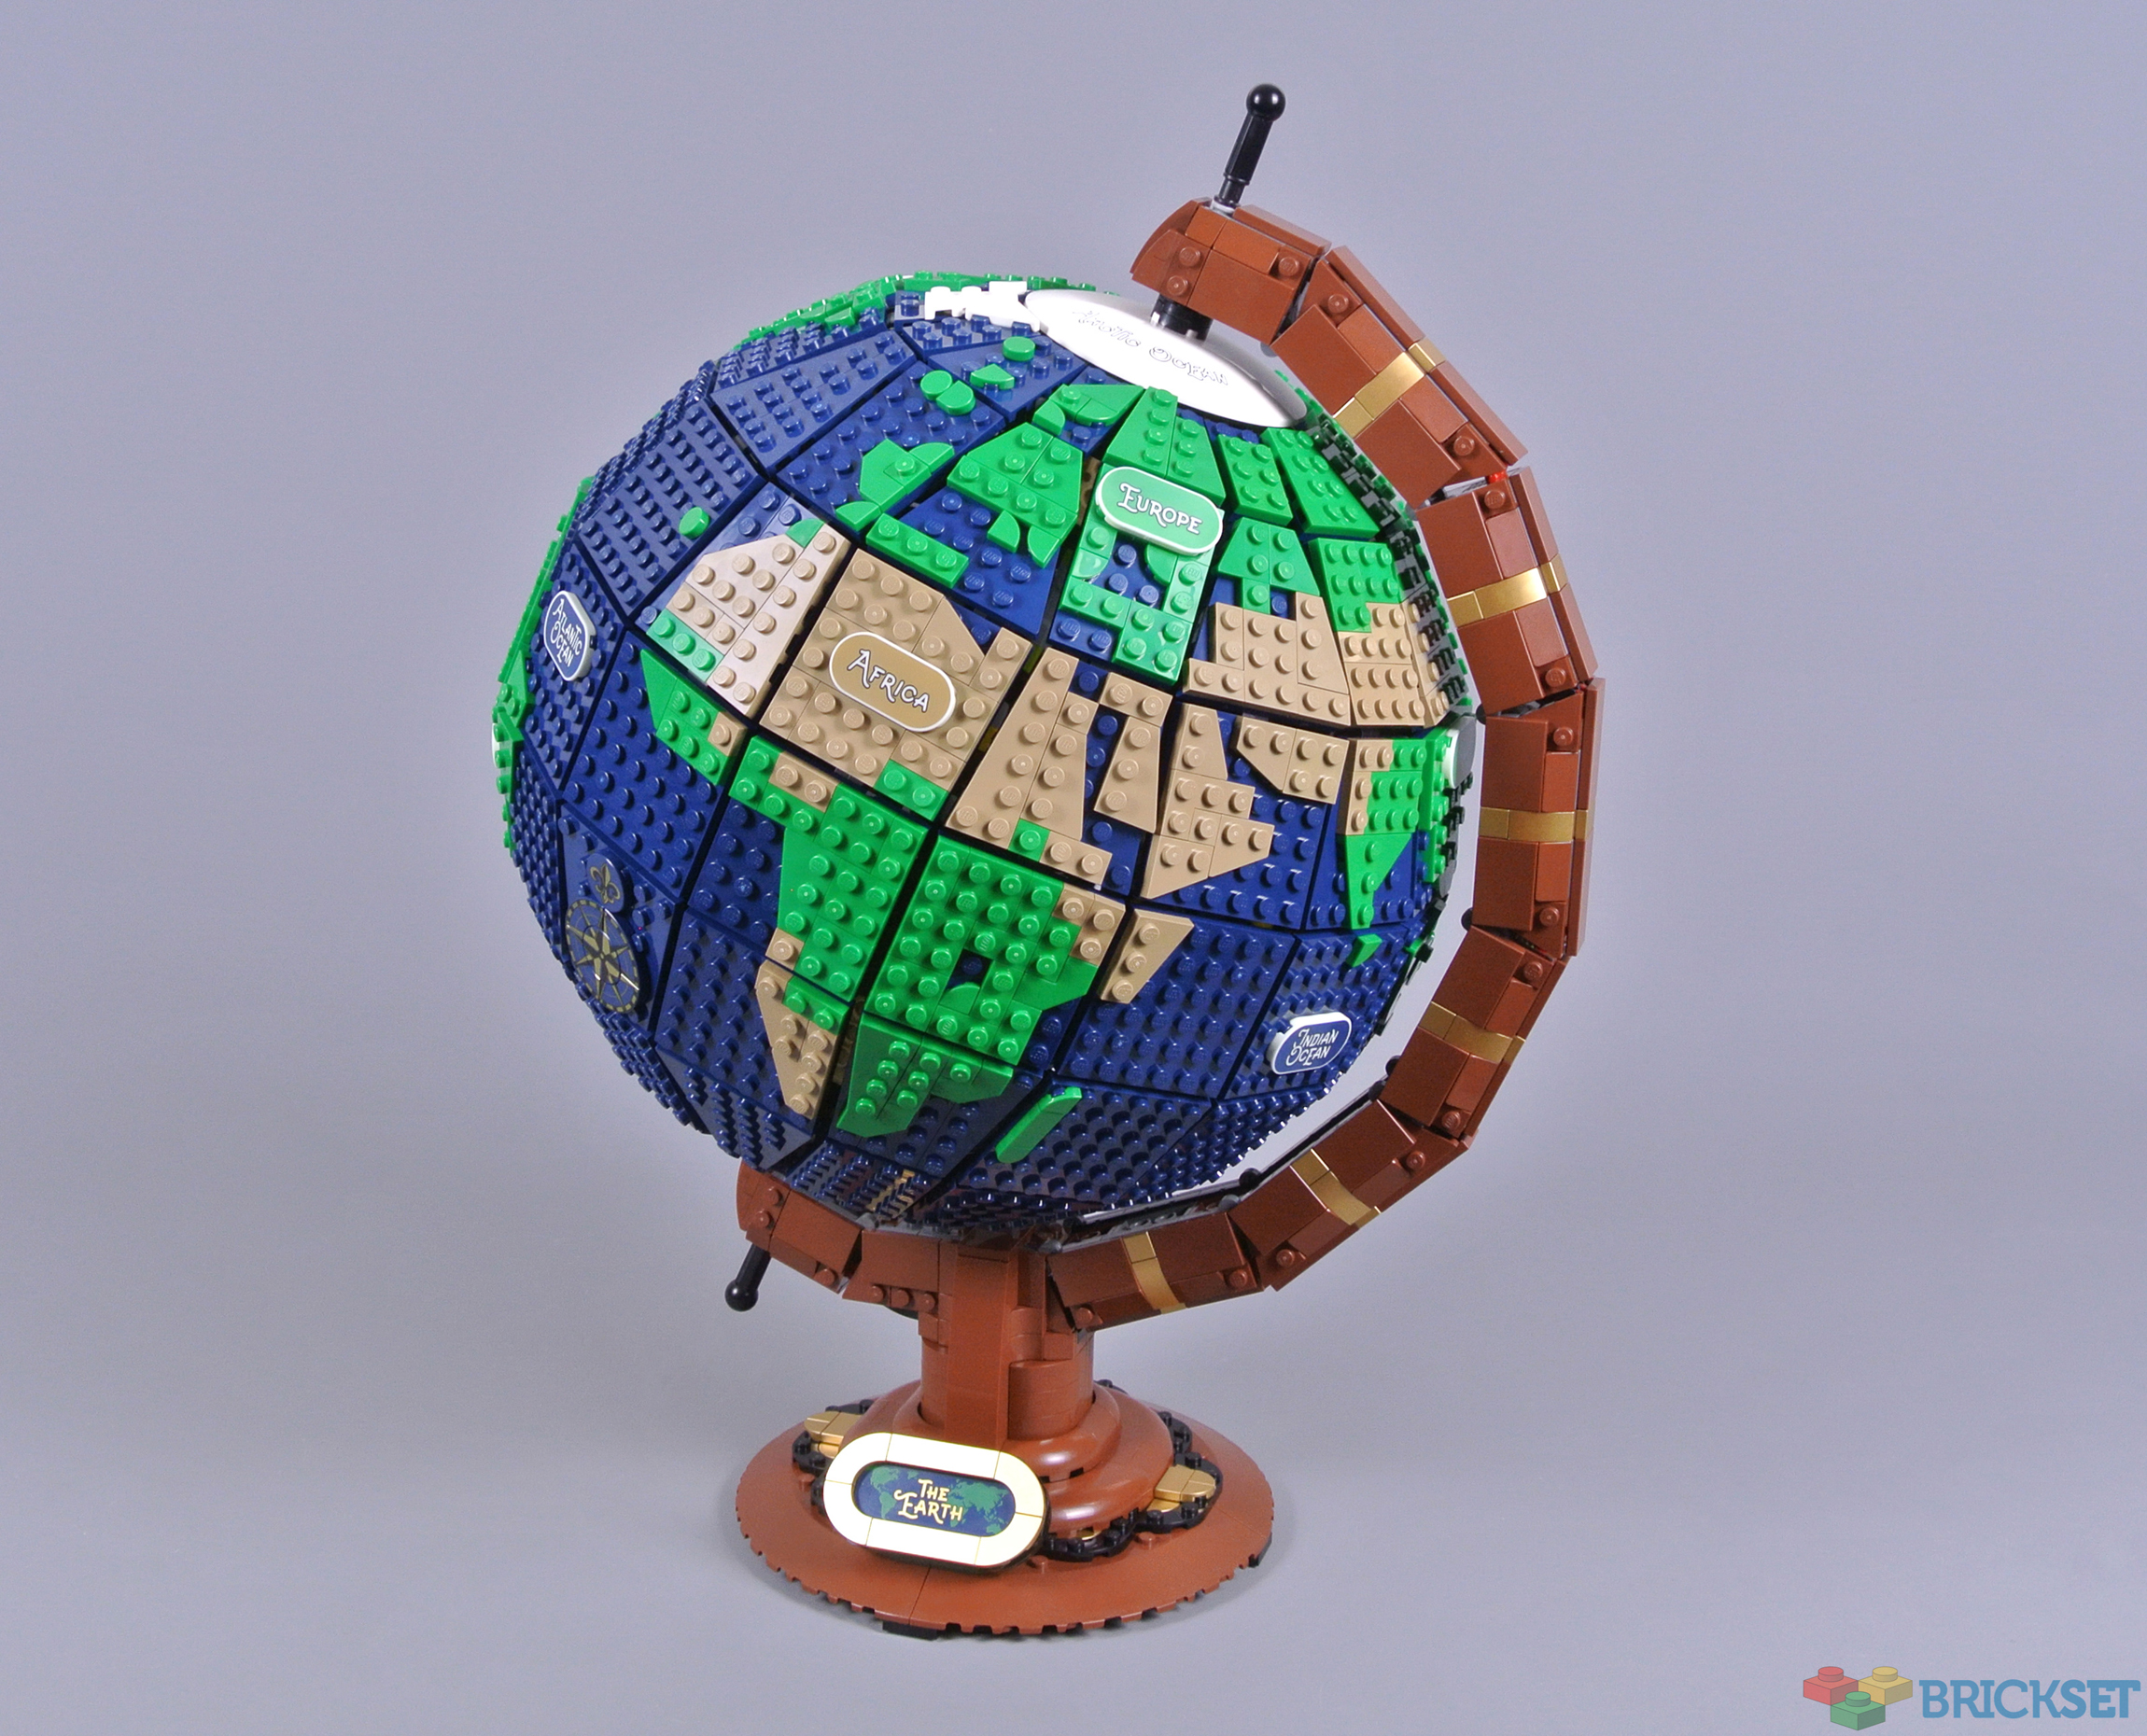 Lego's Spinning 3D Globe Is Perfect for Adults Who Love to Build